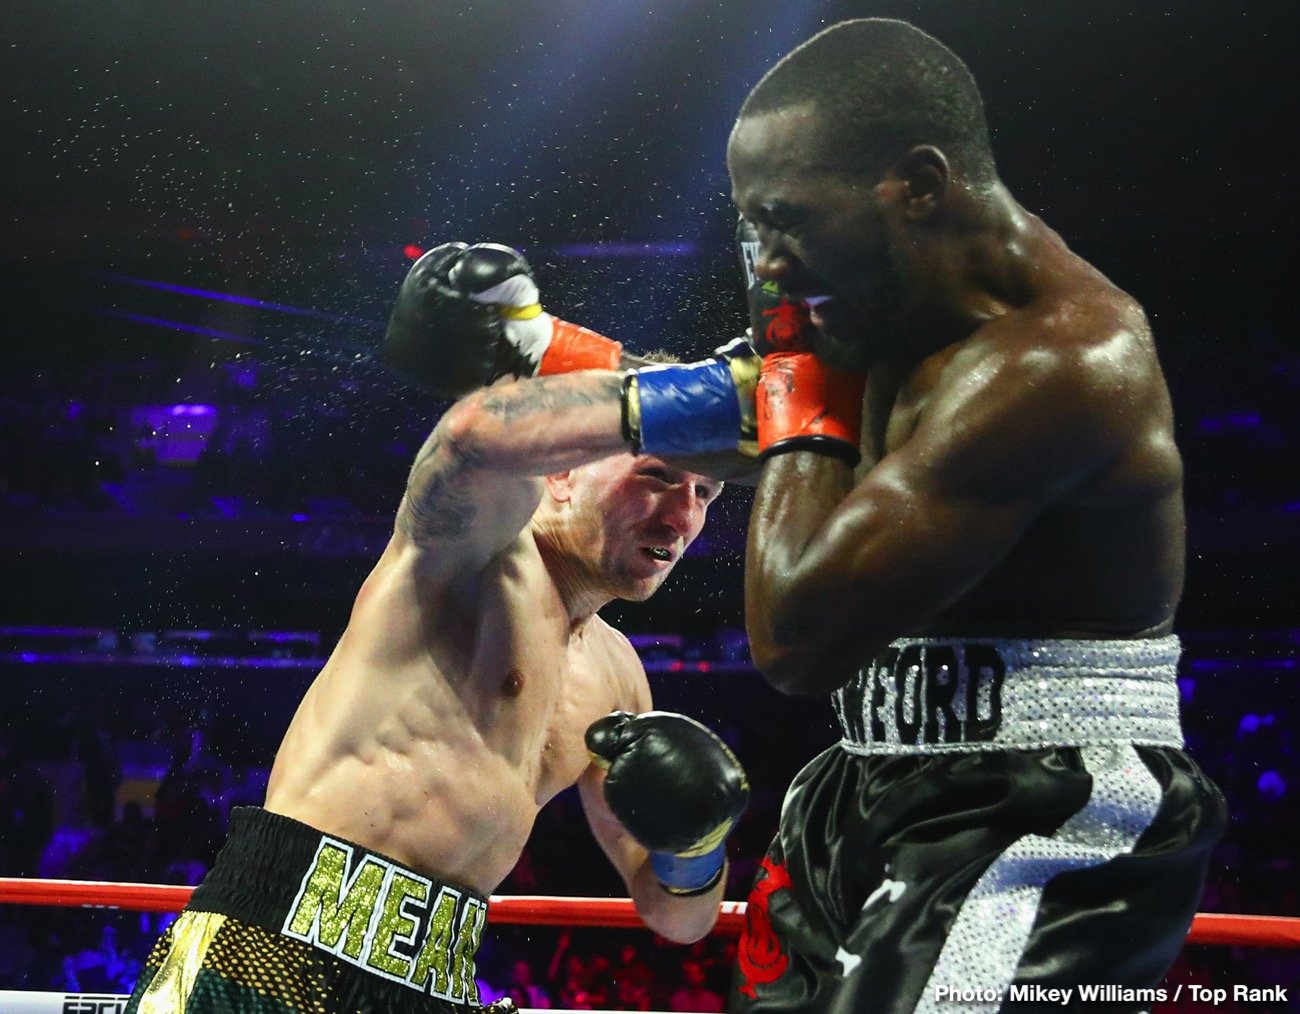 Image: Terence Crawford's trainer Brian McIntyre says Errol Spence fight happens in 2020